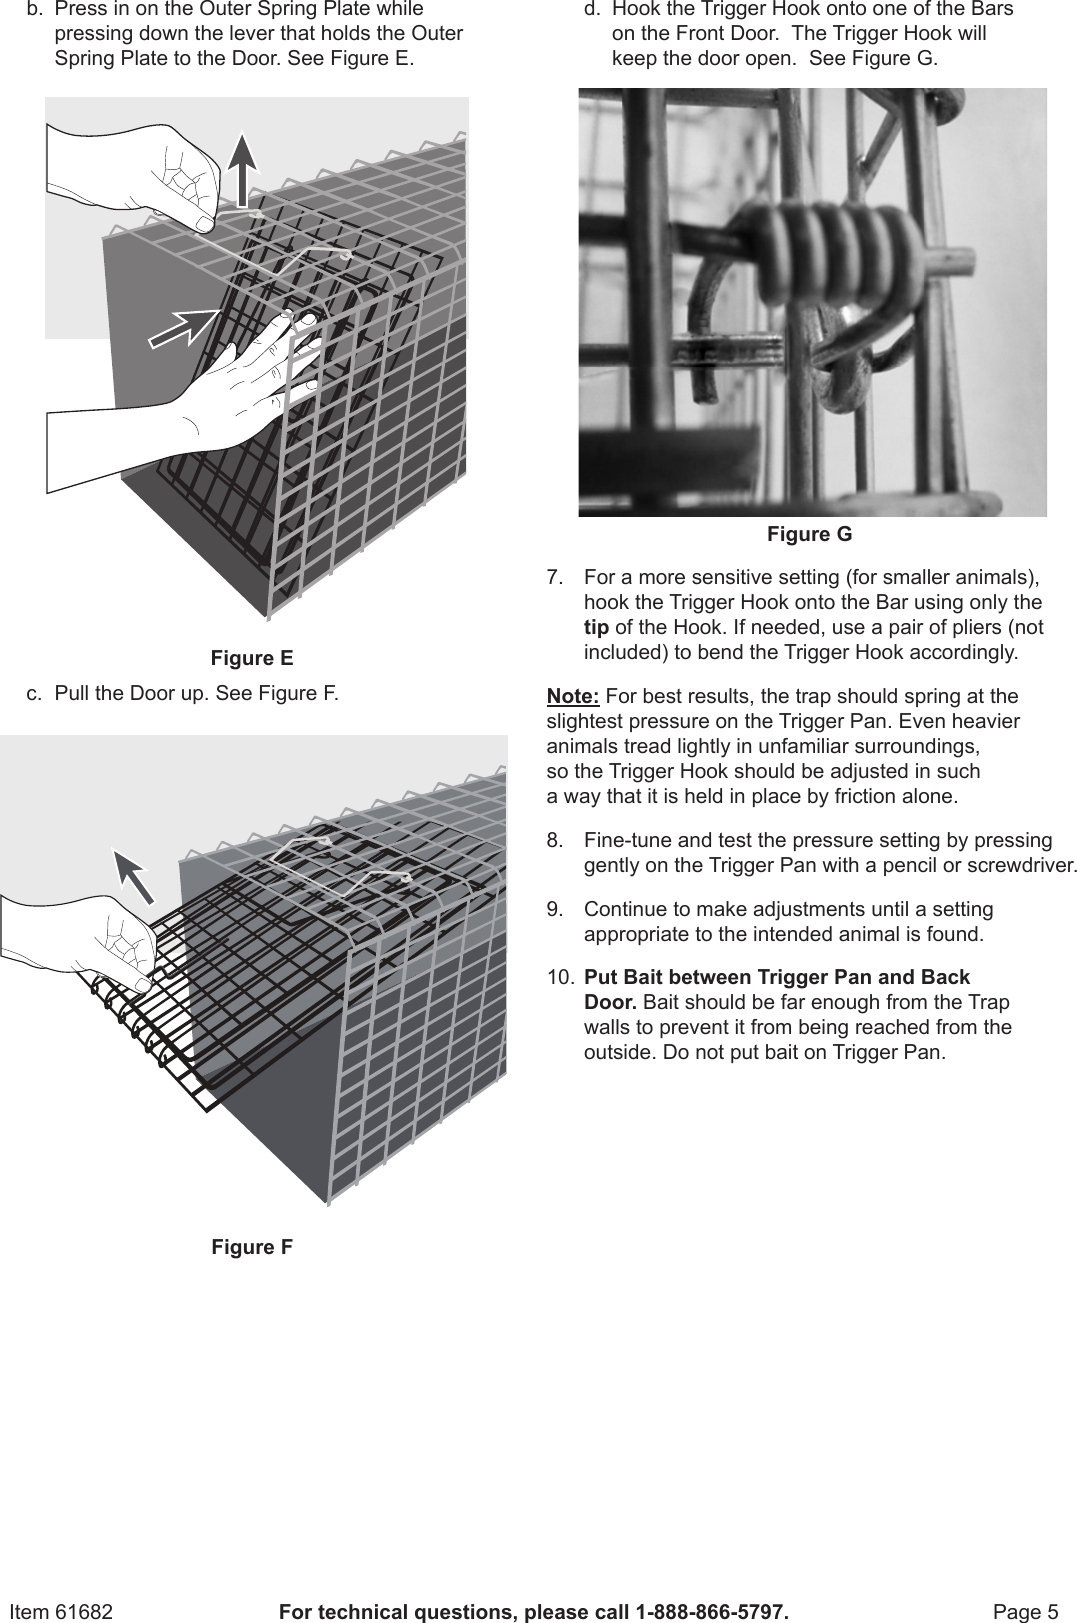 Page 5 of 8 - Harbor-Freight Harbor-Freight-32-In-X-15-In-X-10-In-Medium-Animal-Trap-Product-Manual-  Harbor-freight-32-in-x-15-in-x-10-in-medium-animal-trap-product-manual